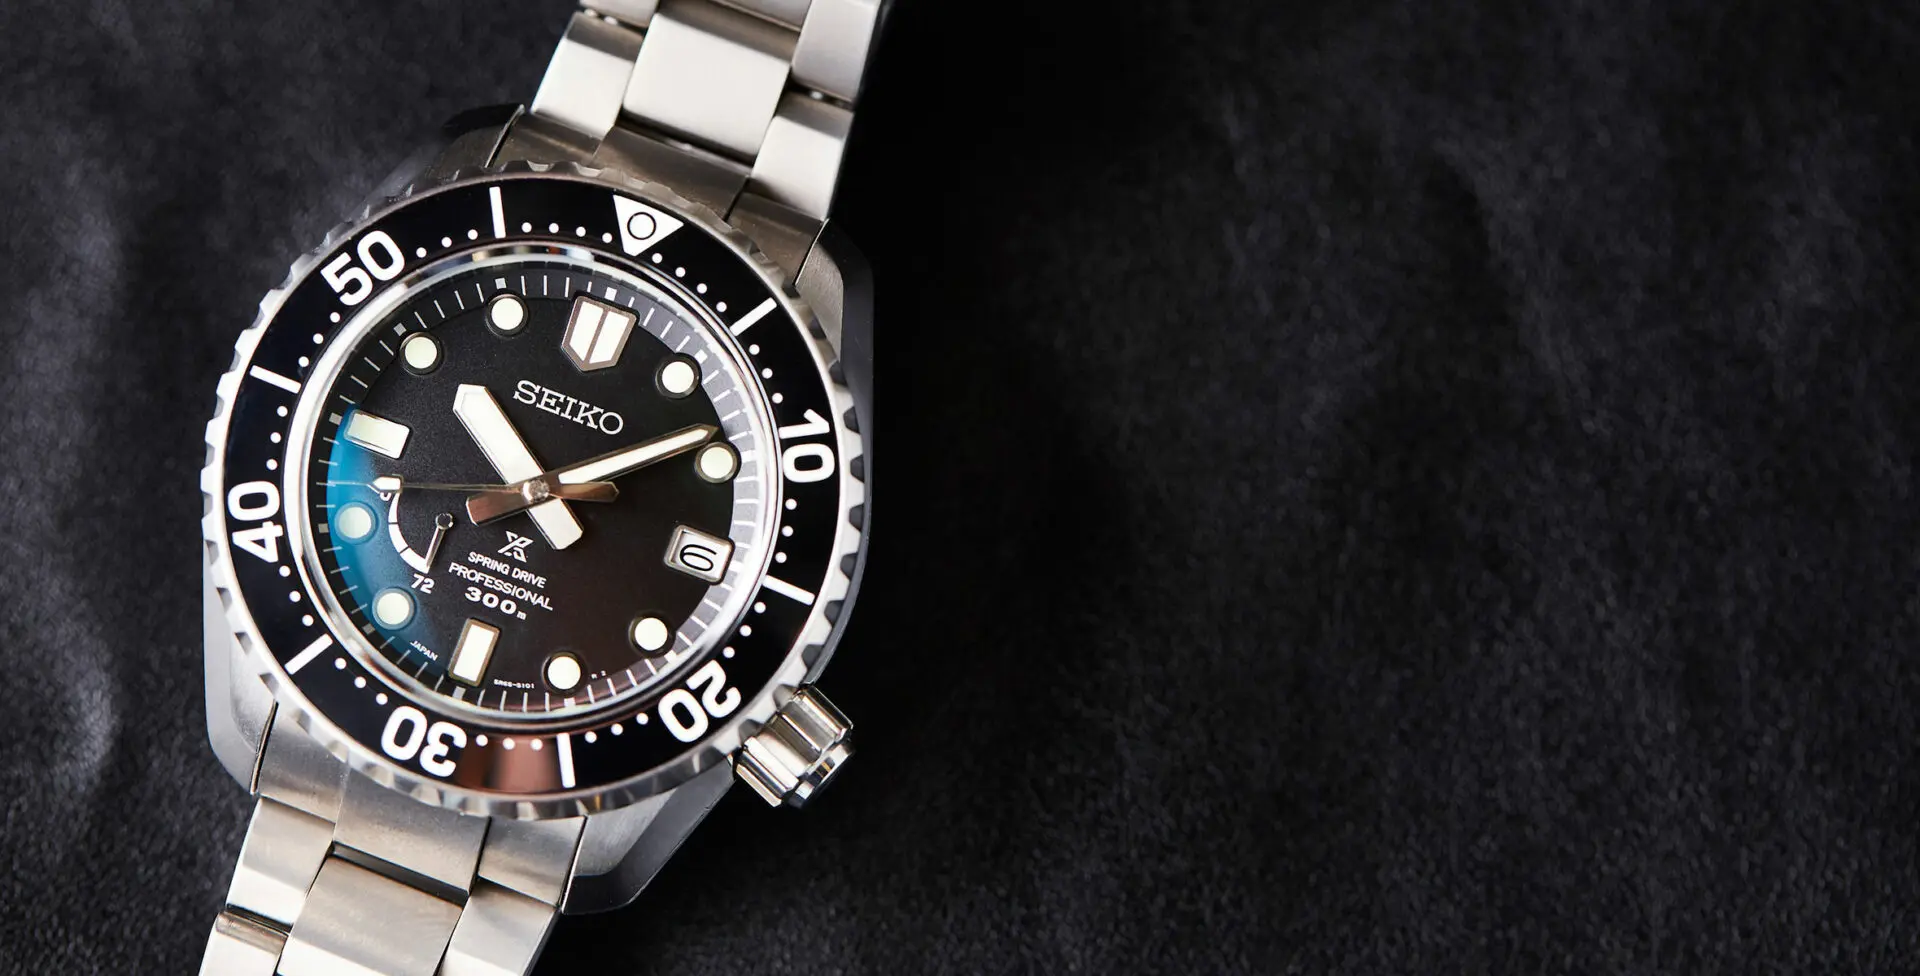 VIDEO: A closer look at the Seiko Prospex LX SNR029J - Time and Tide Watches